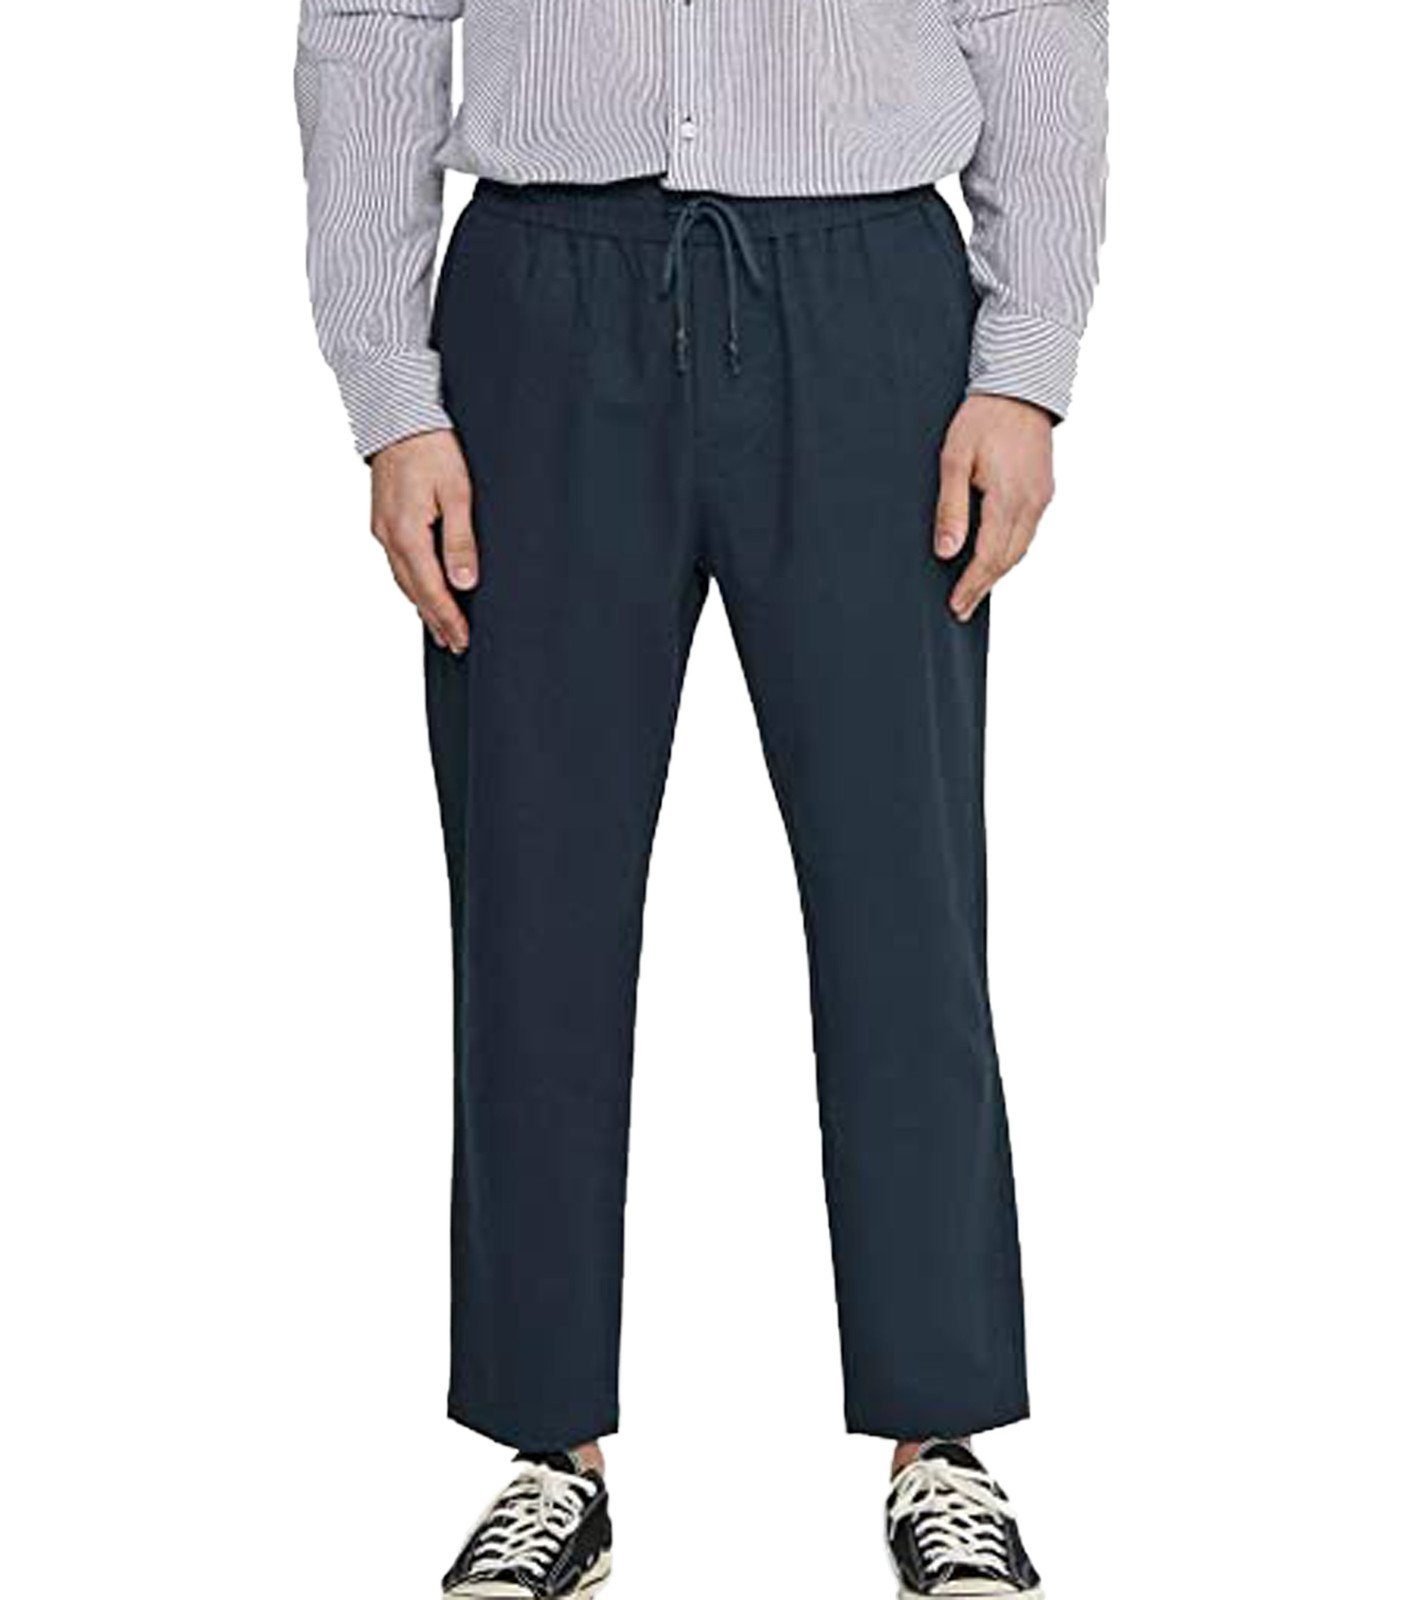 ONLY & SONS Stoffhose »ONLY & SONS Herren Chino-Hose Business-Hose Linus  Crop Linen Mix Stoff-Hose Blau« online kaufen | OTTO